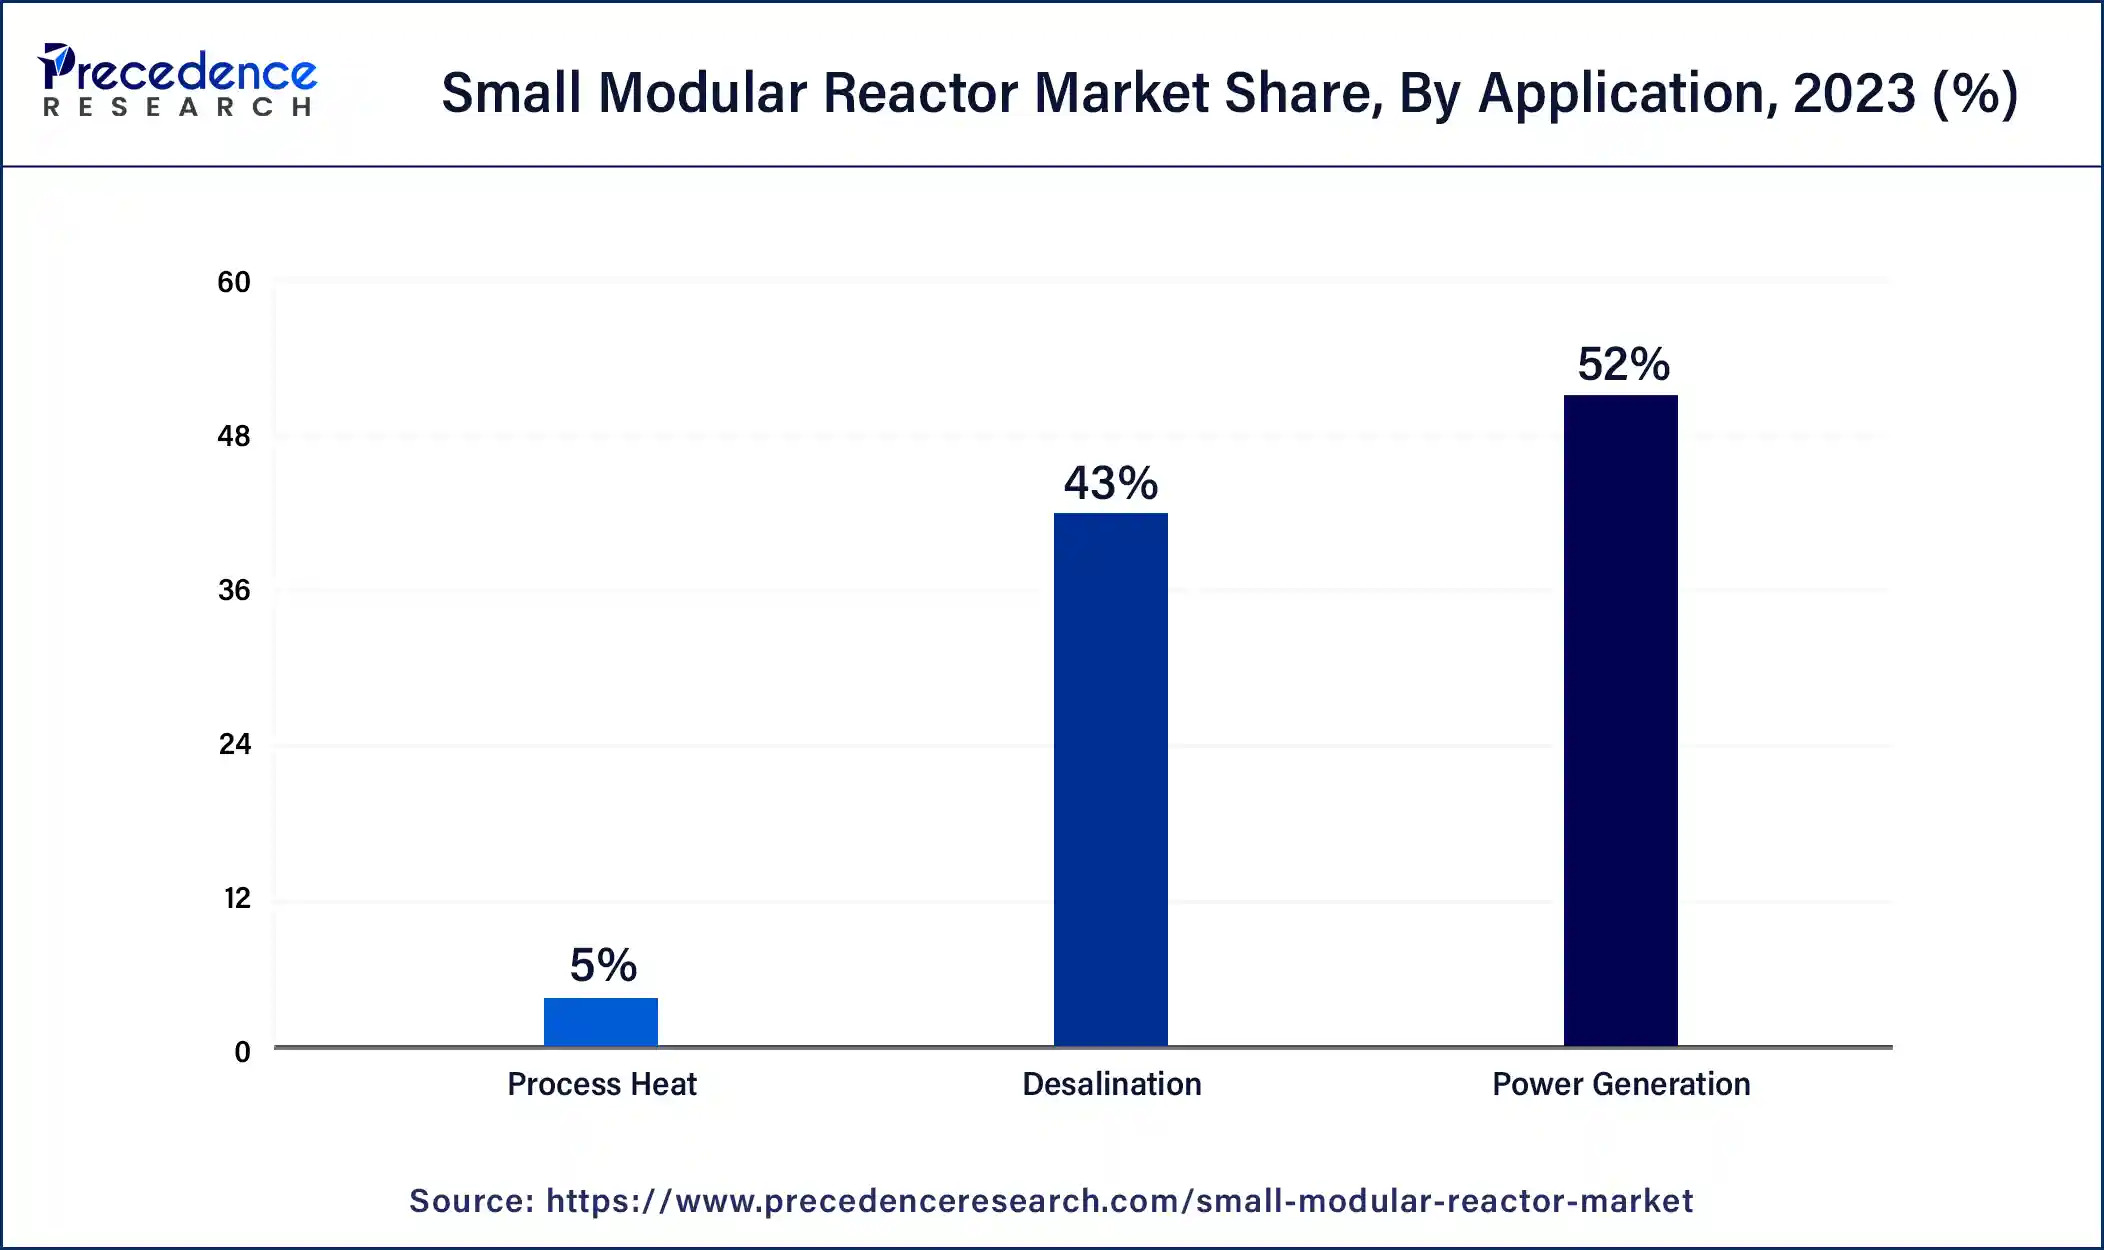 Small Modular Reactor Market Share, By Application, 2023 (%)